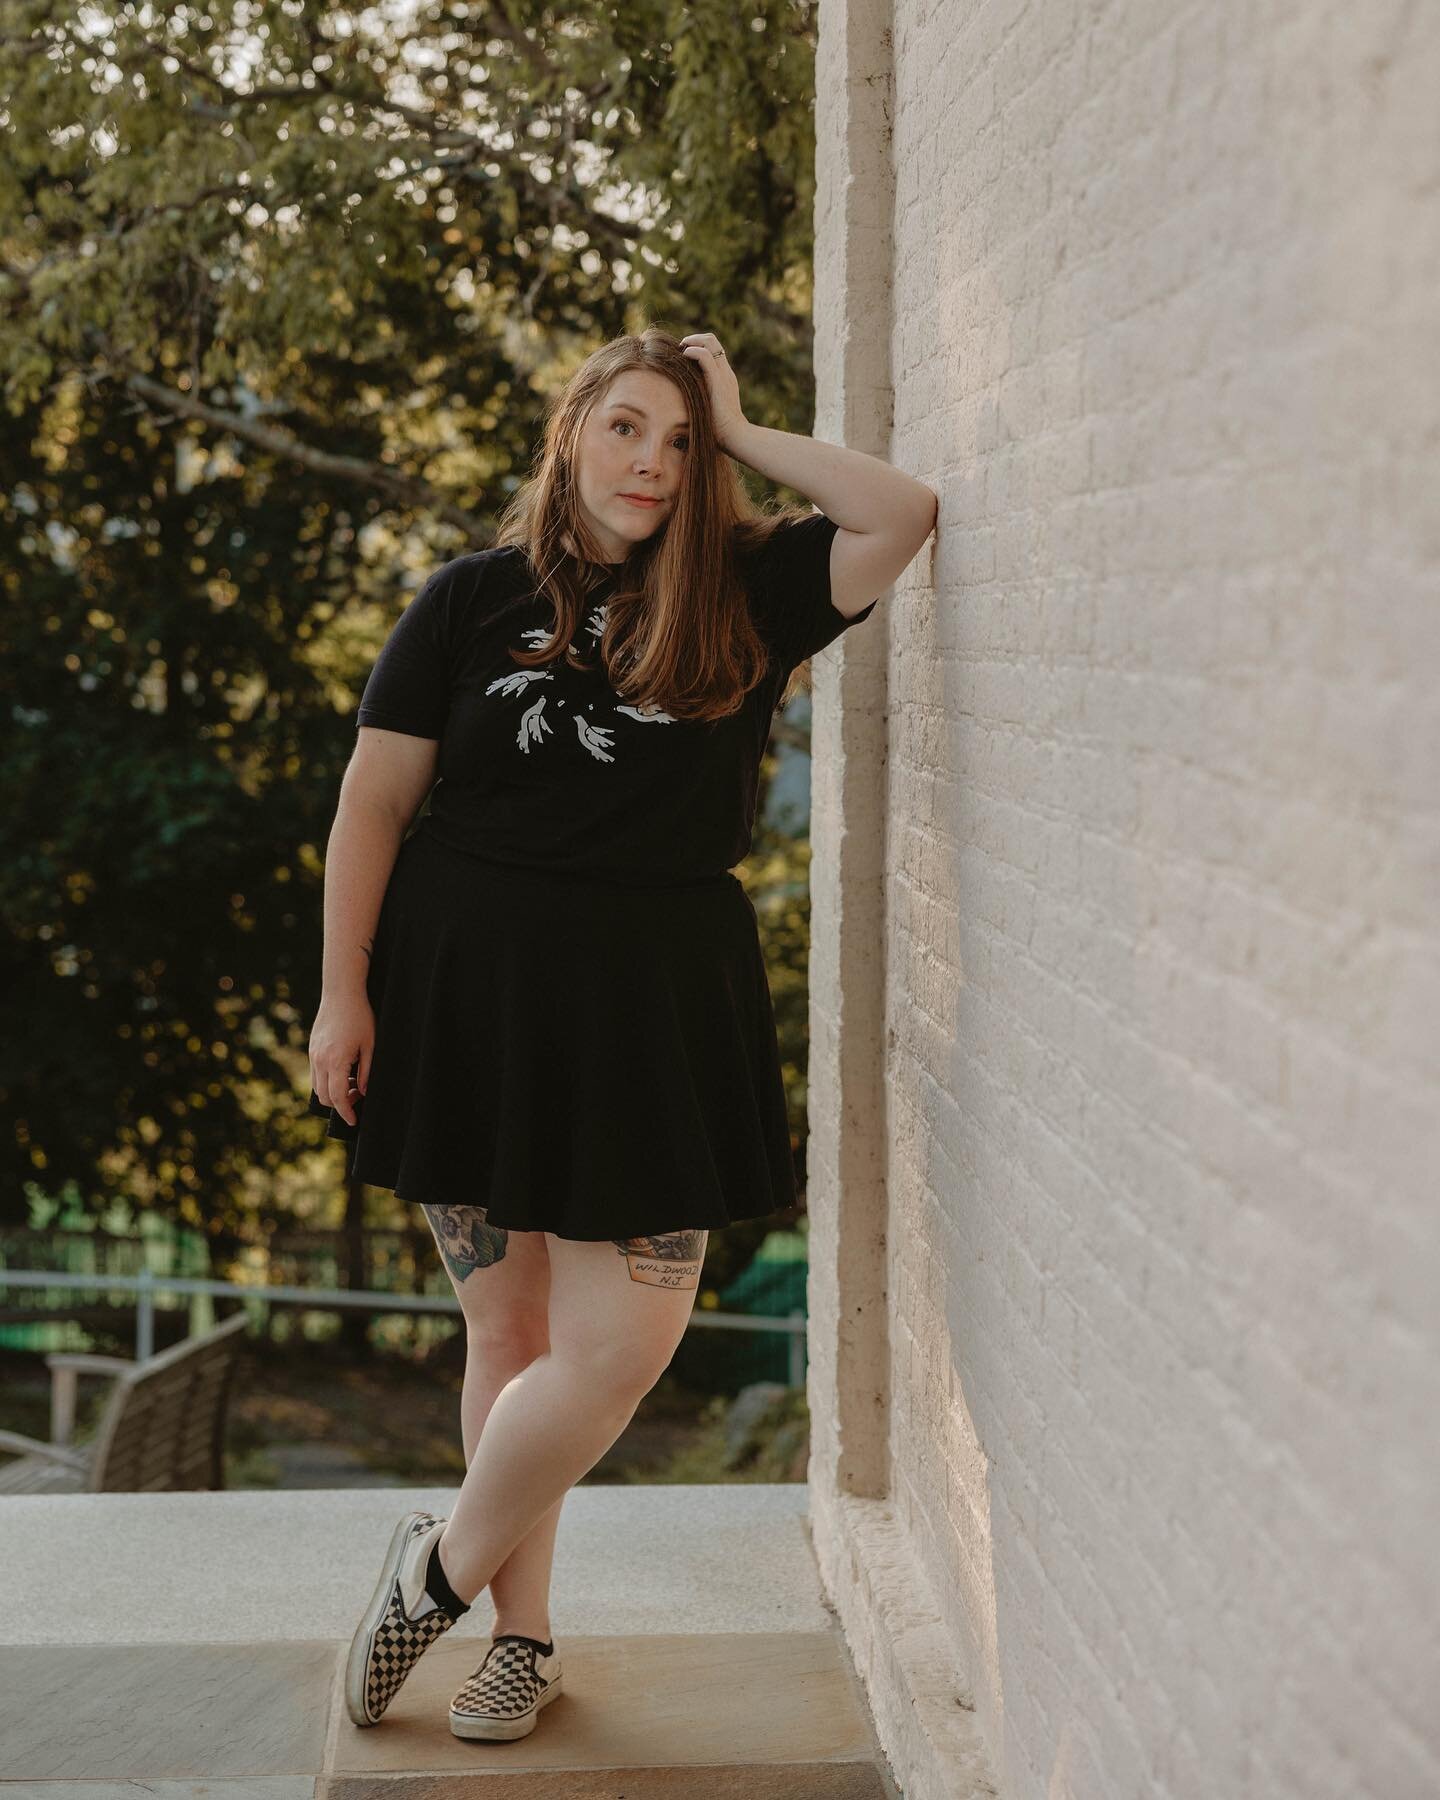 Hey friends,

It&rsquo;s me, your ghostbusters loving emo photographer bestie! 

Yesterday, I finally got in front of the camera, which hasn&rsquo;t happened since 2020. All I can say is thank goodness the photos were captured by my amazing fellow ph